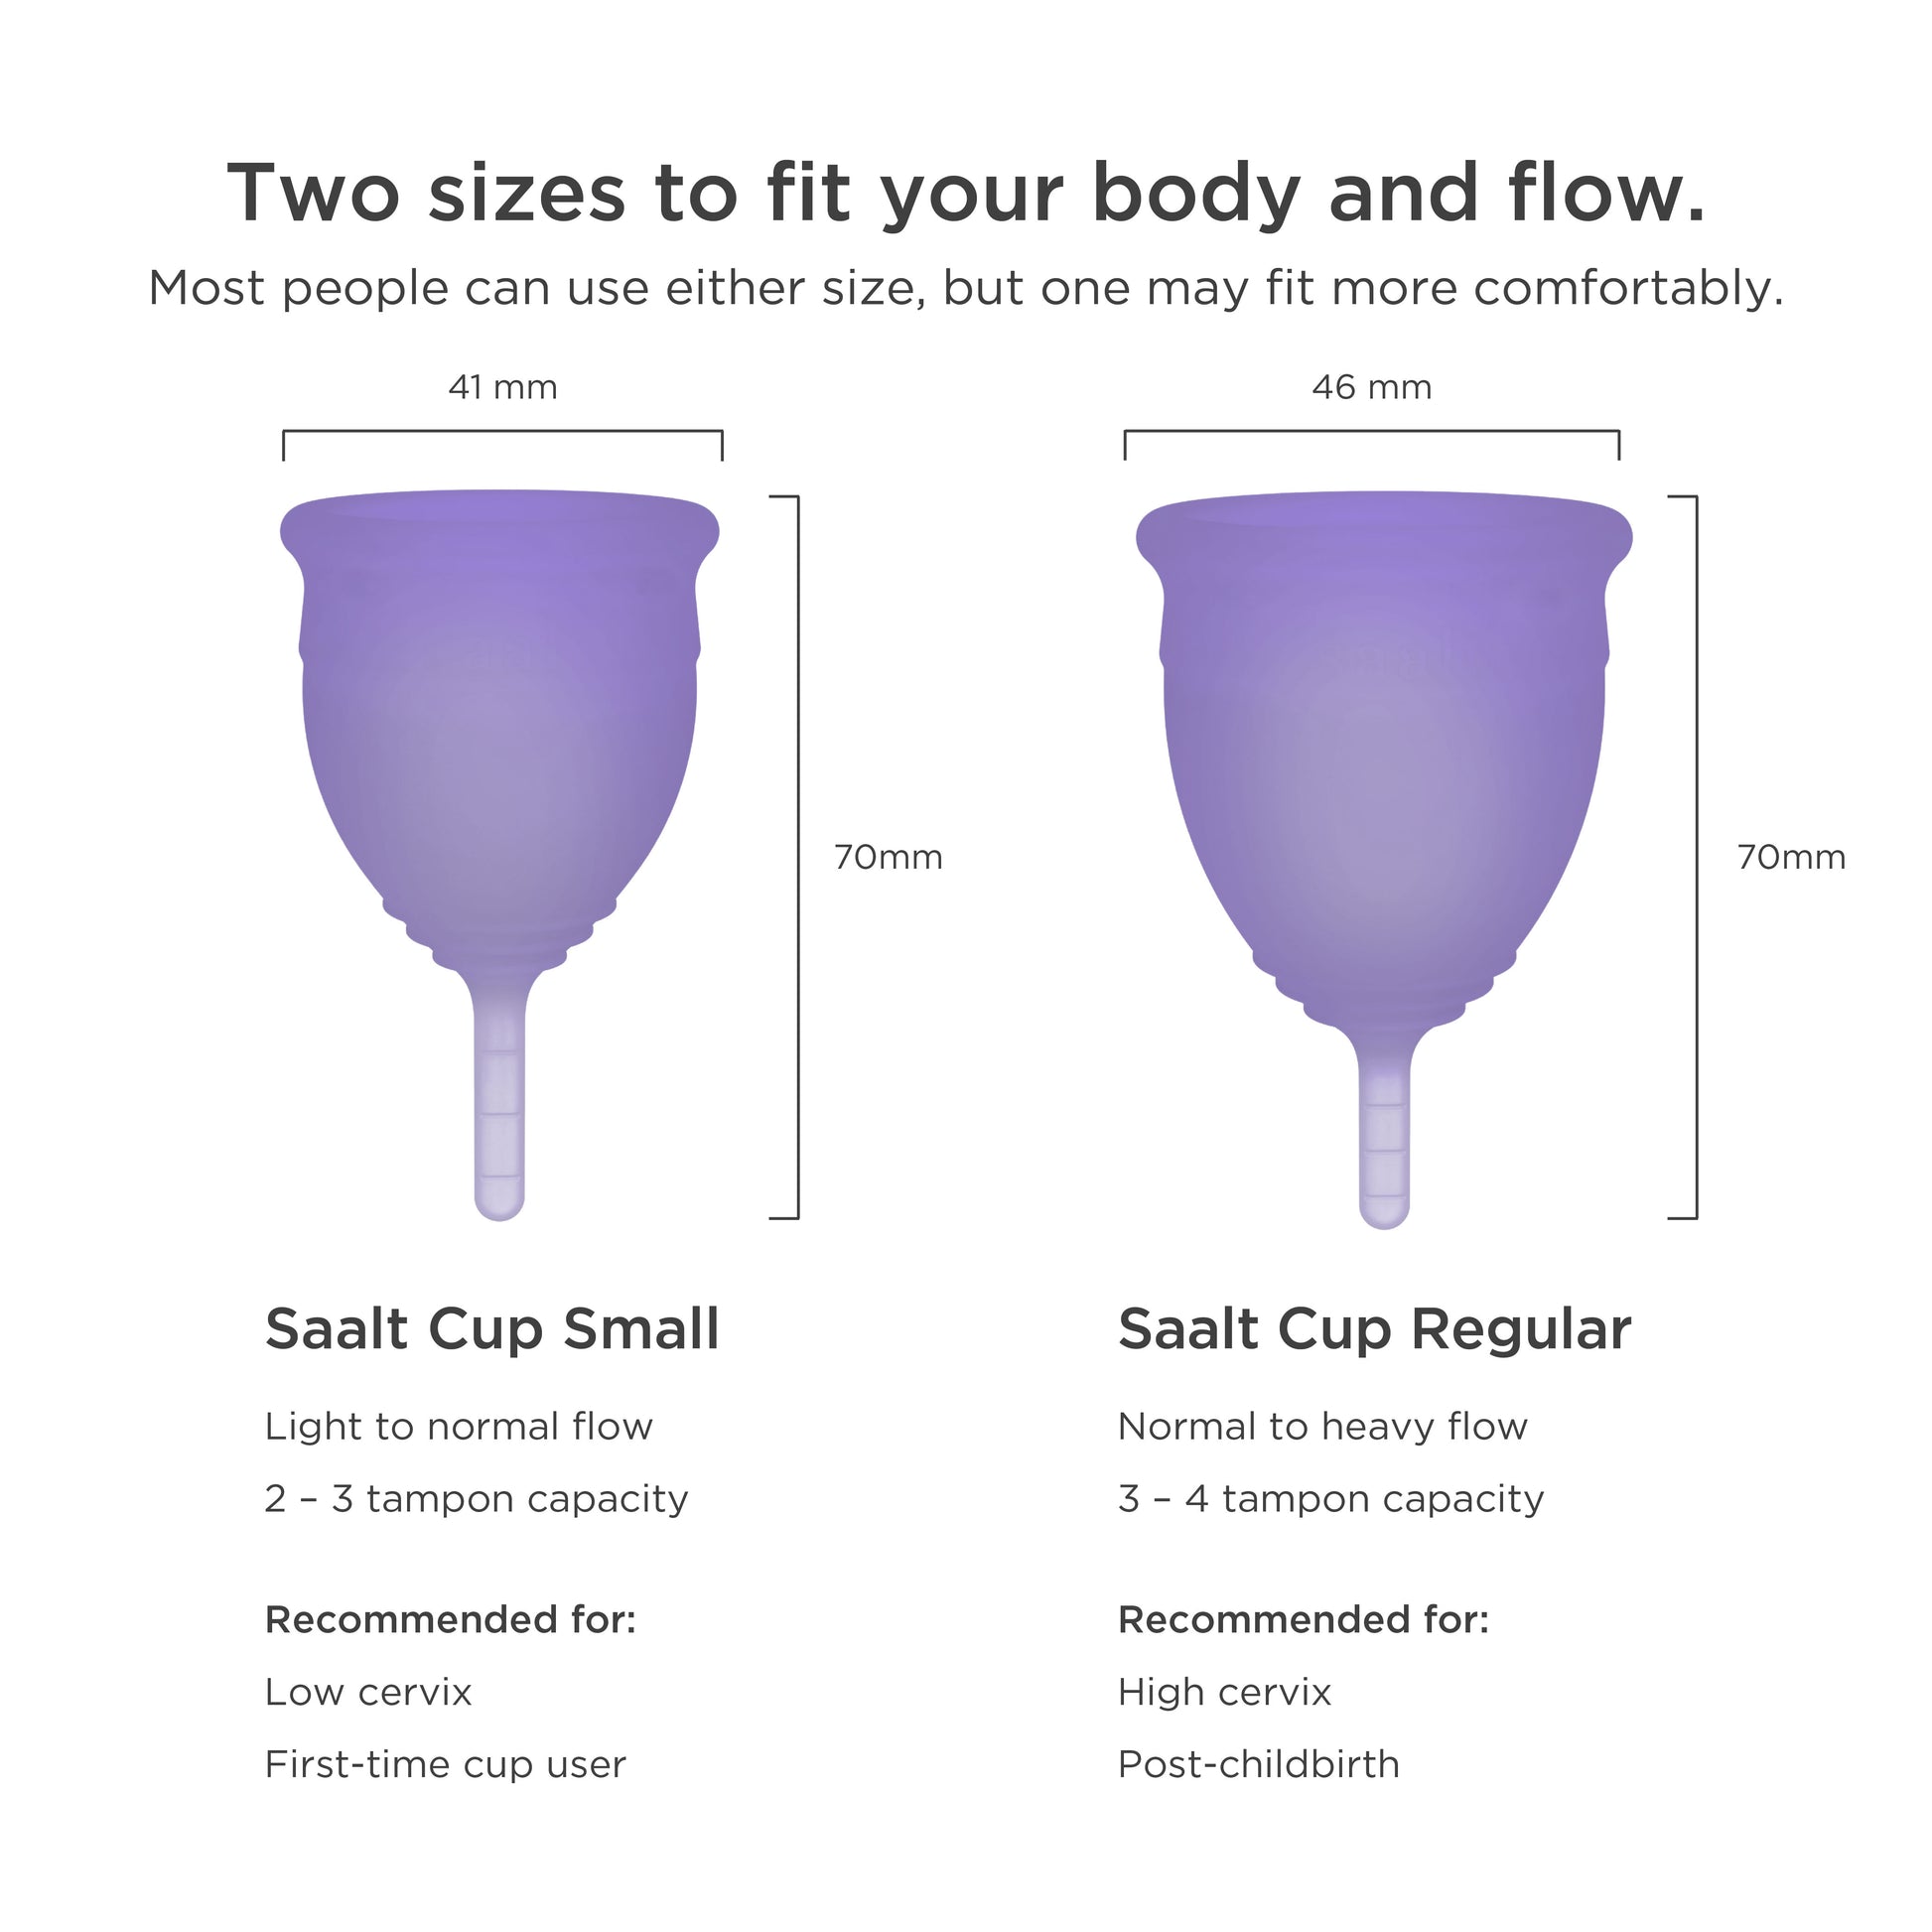 Soft Cup, Menstrual Cups